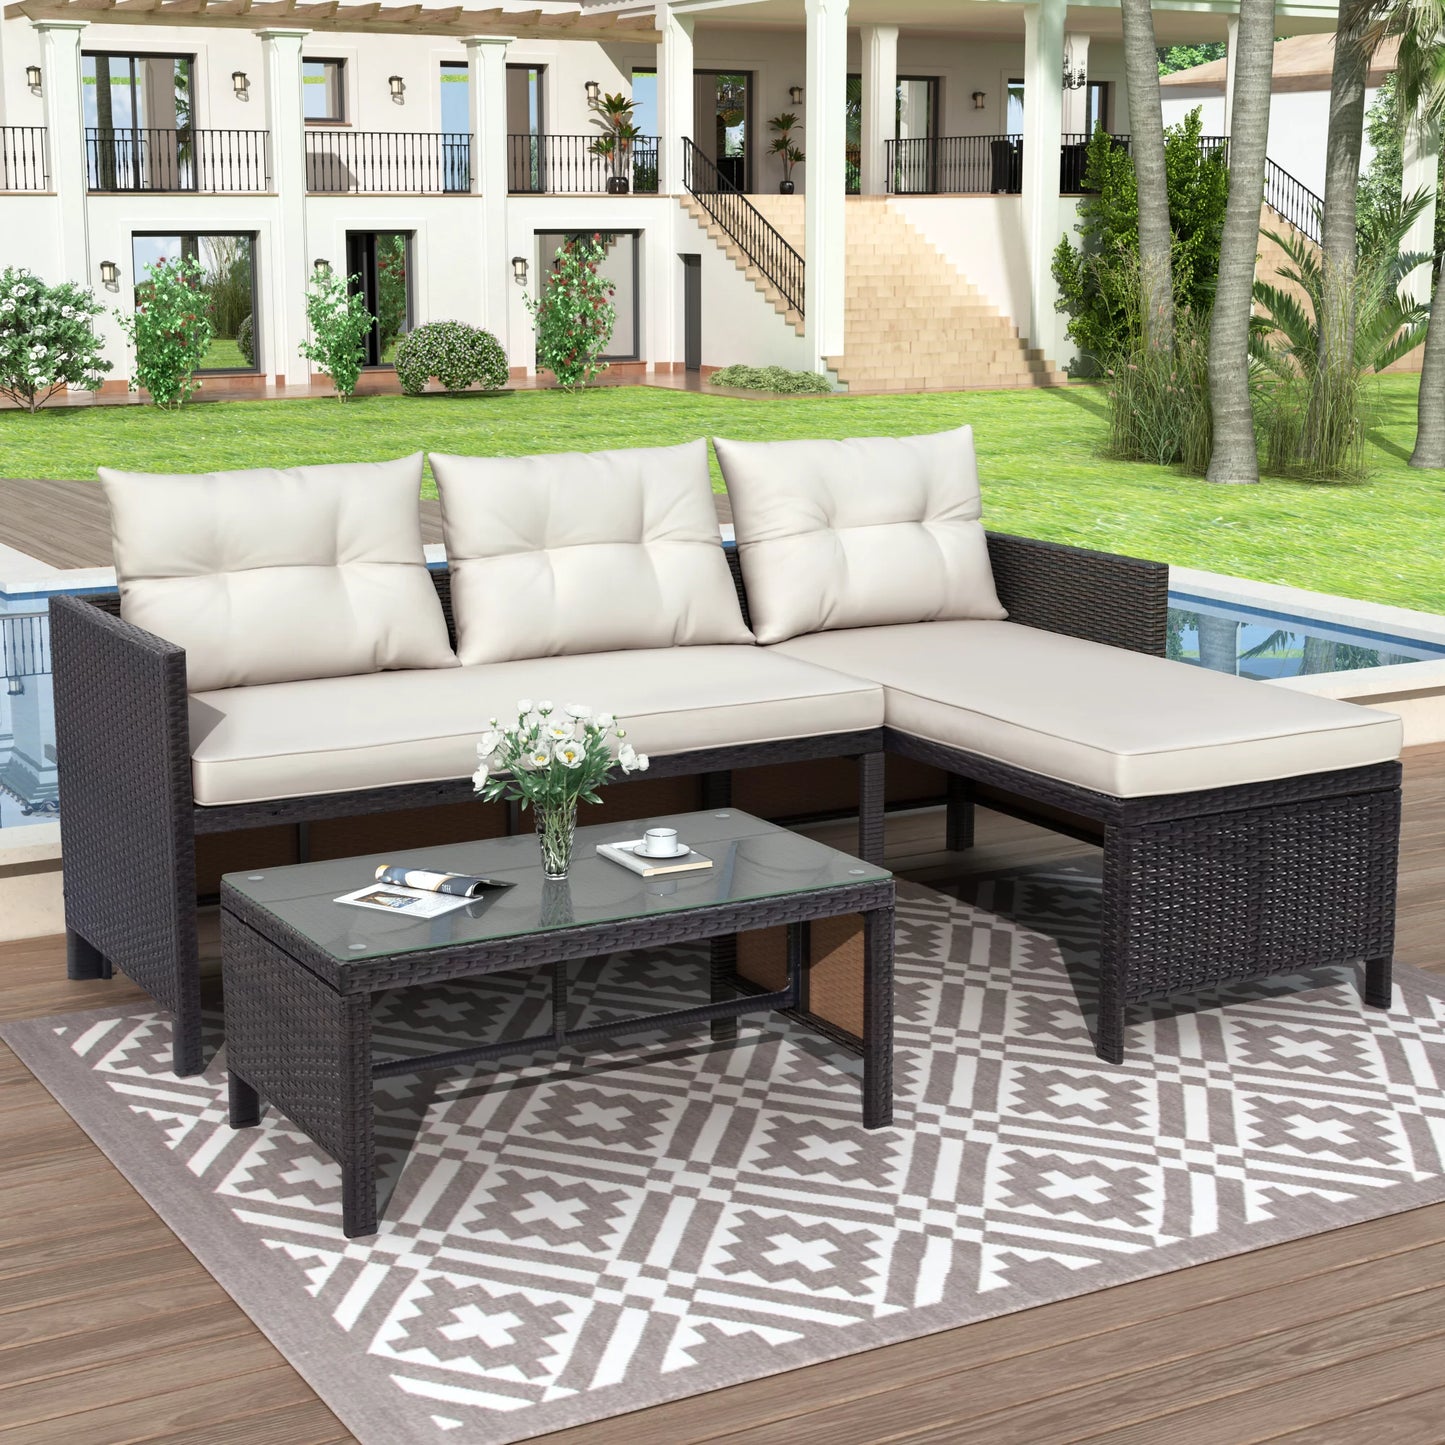 SYNGAR 4 Pieces Patio Furniture Sectional Set, Outdoor All-Weather Manual Weaving Wicker Conversation Set with Cushion & Table, Rattan Sectional Sofa Set, Yard Porch Deck Use Furniture Set, B630